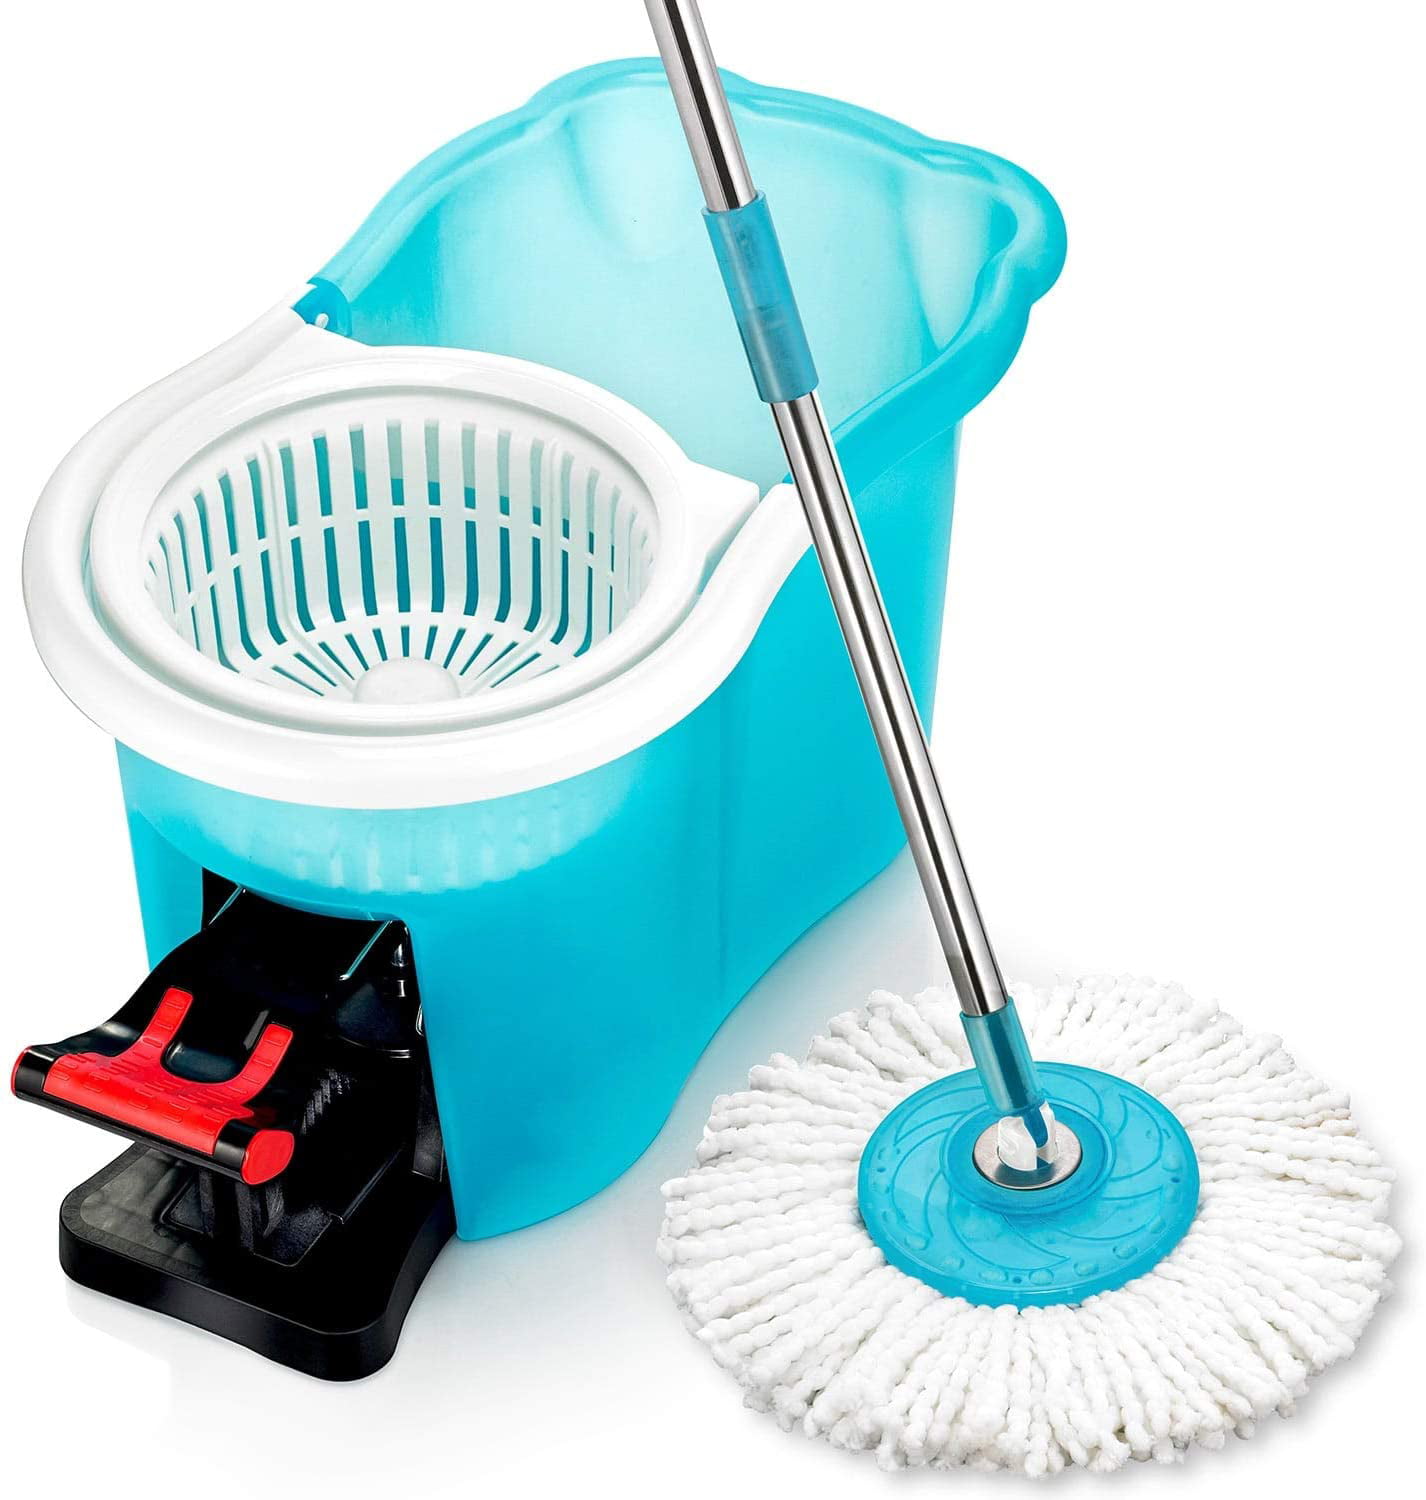 NEW Honors 889H Dual Spinning Wet Mop Cleaner Wired Twin Mop Floor Cleaner 220V 